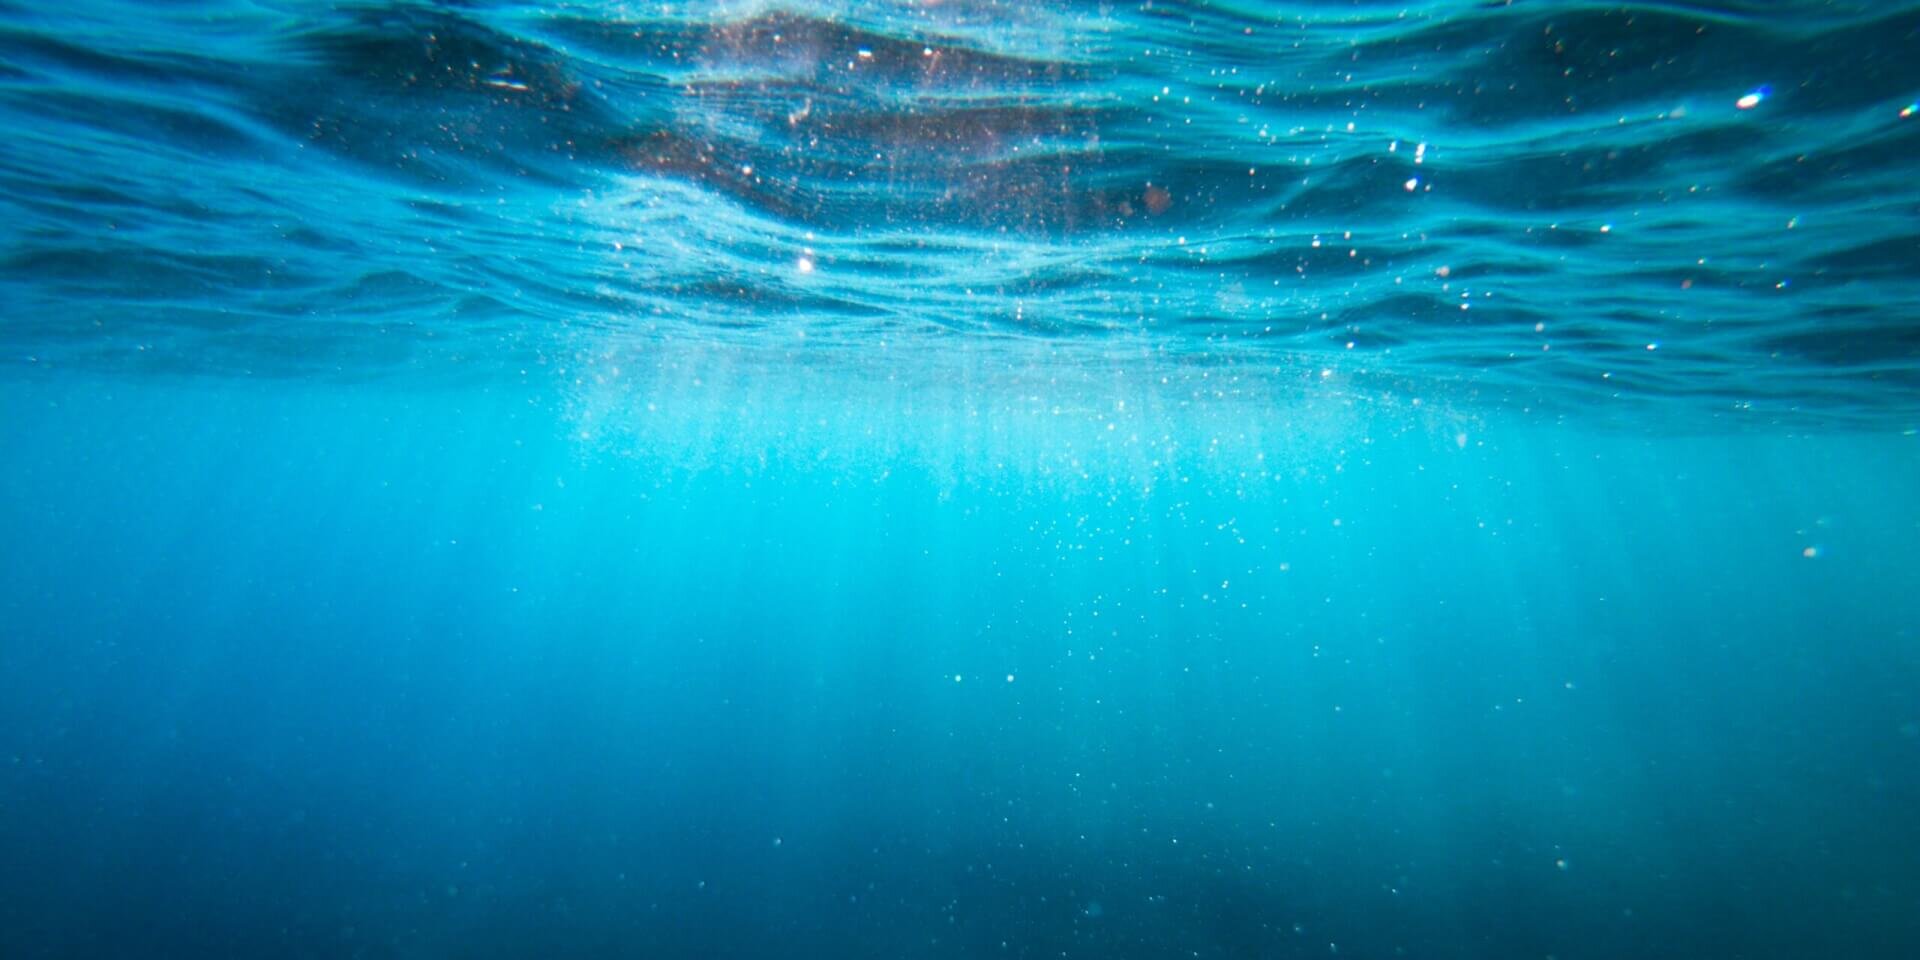 Underwater photo showing a clear blue body of water